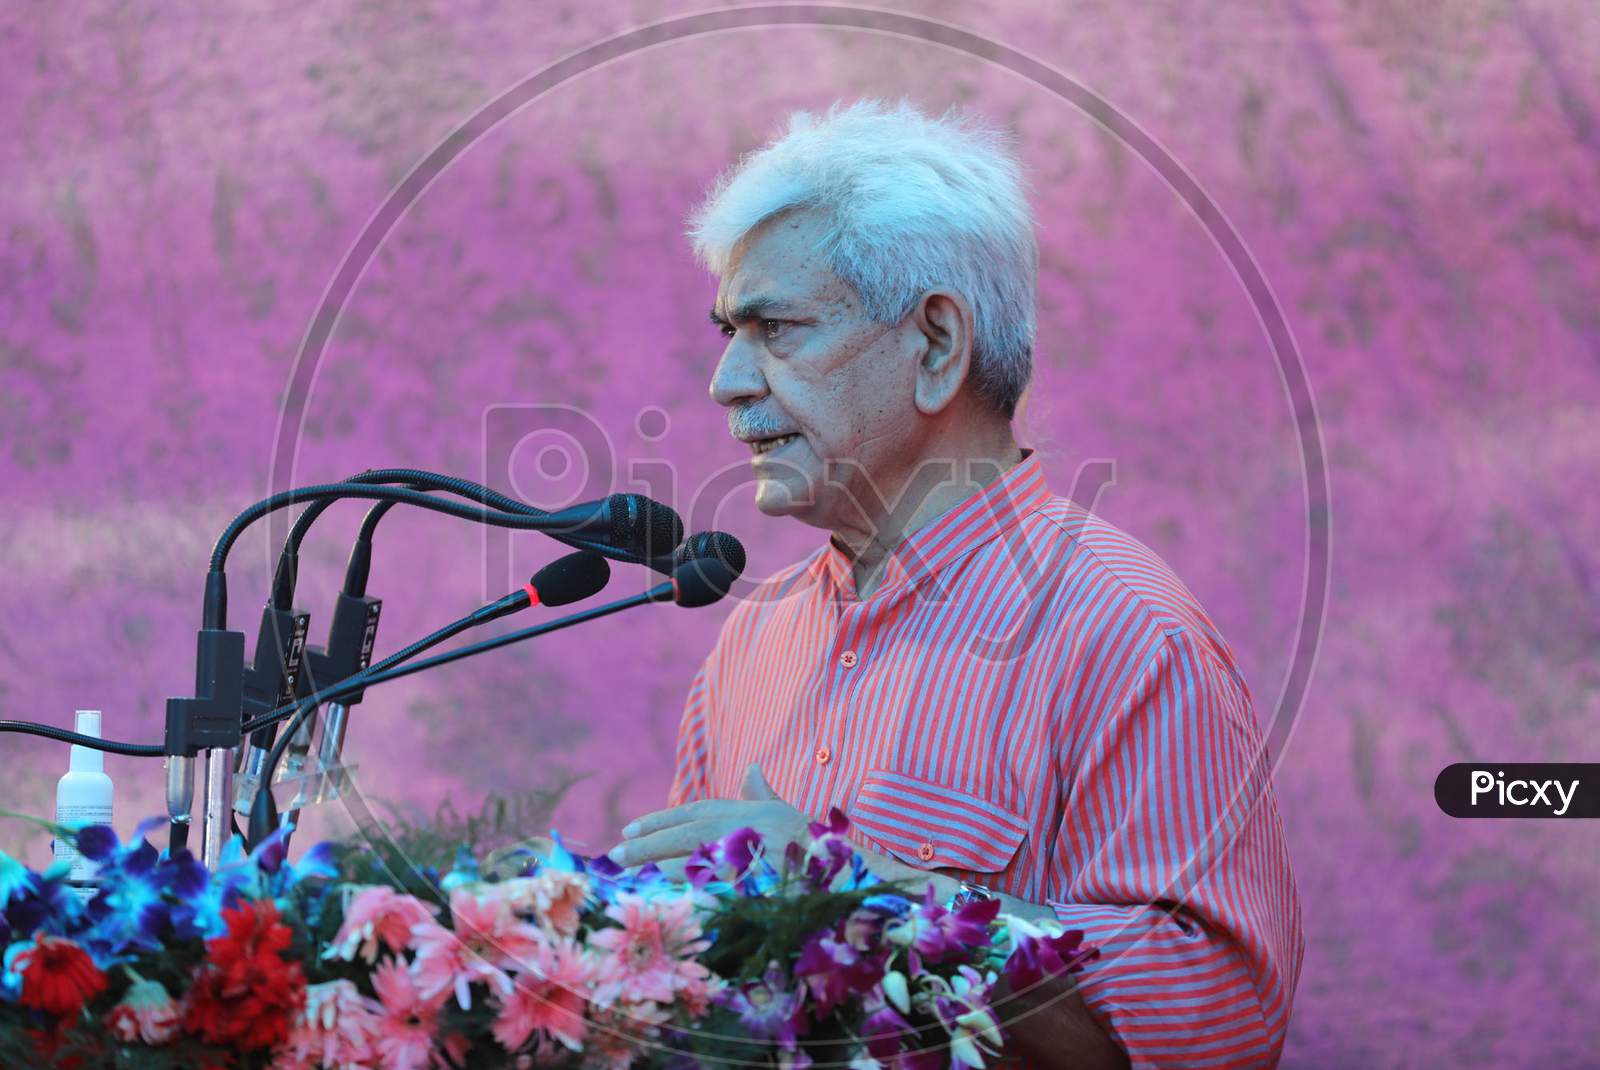 Jammu and Kashmir Lt governor Manoj Sinha addresses political dignitaries after inaugurating Ring road under (PMDP) from Akhnoor road to Bhalwal in Jammu on August 21,2020.